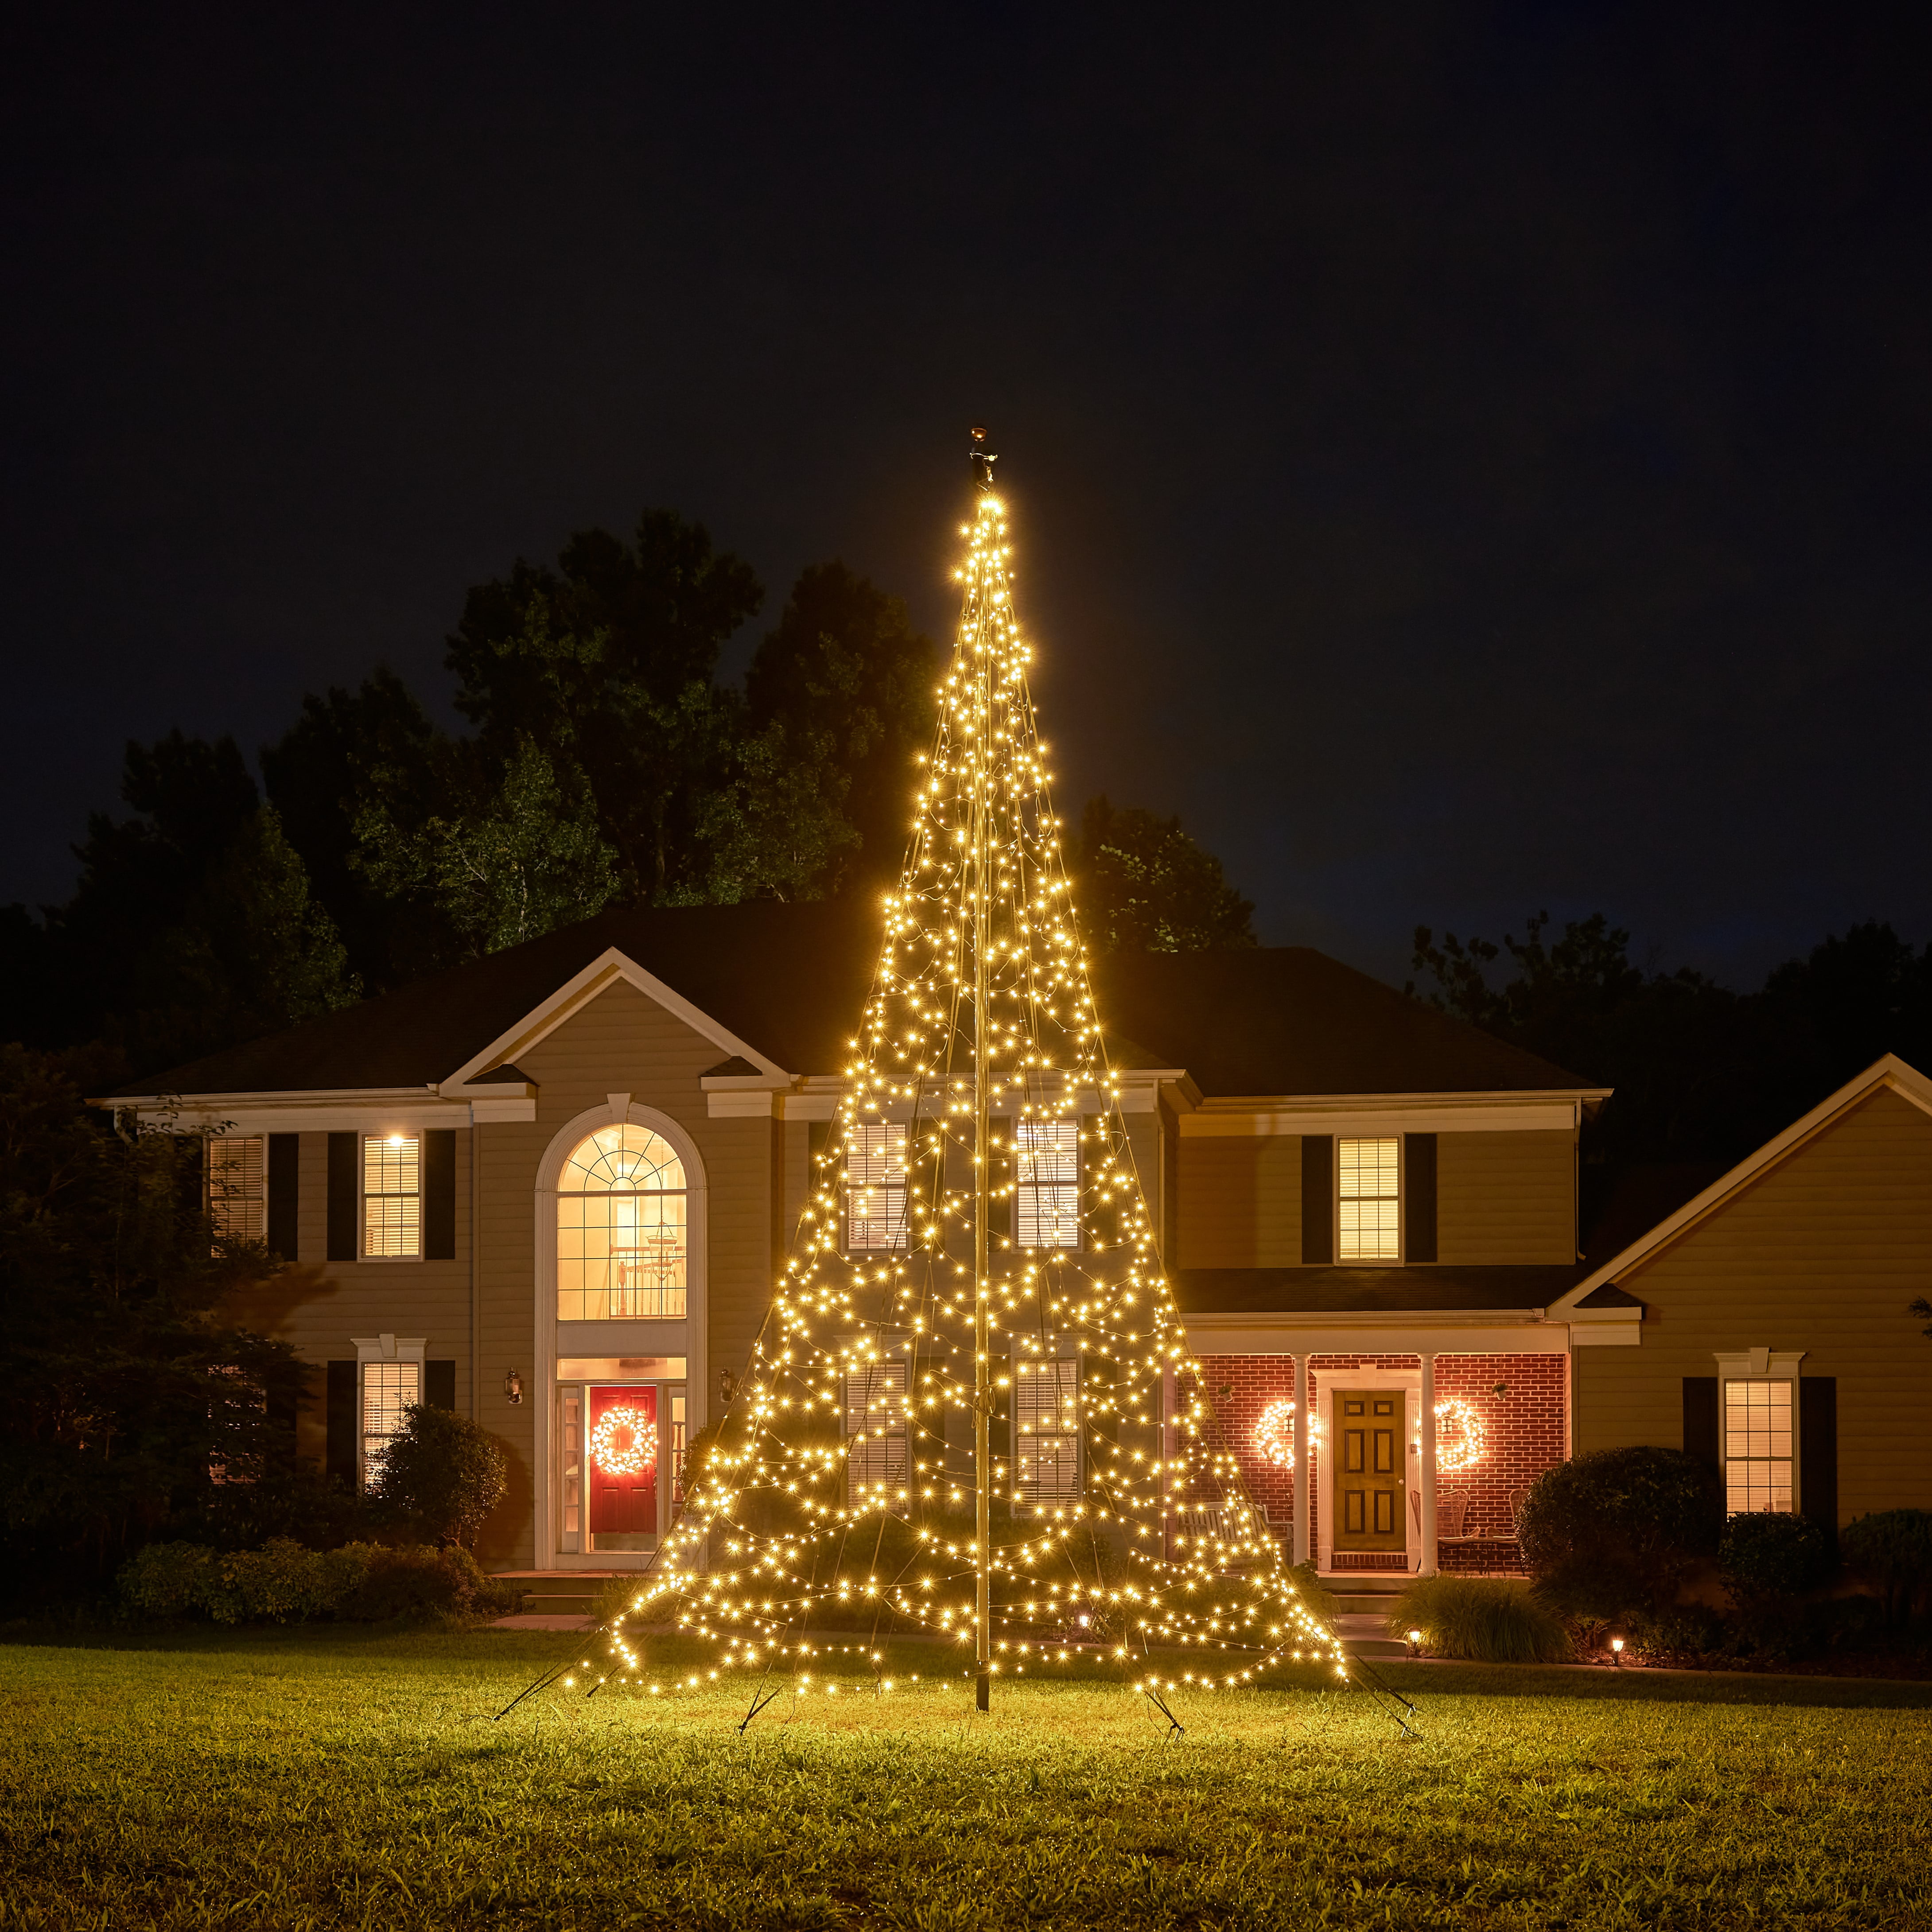 2000LED 5FT Lighted Tree,Timer,Plug In,Light up Trees for Indoor Outdoor  Home Ch